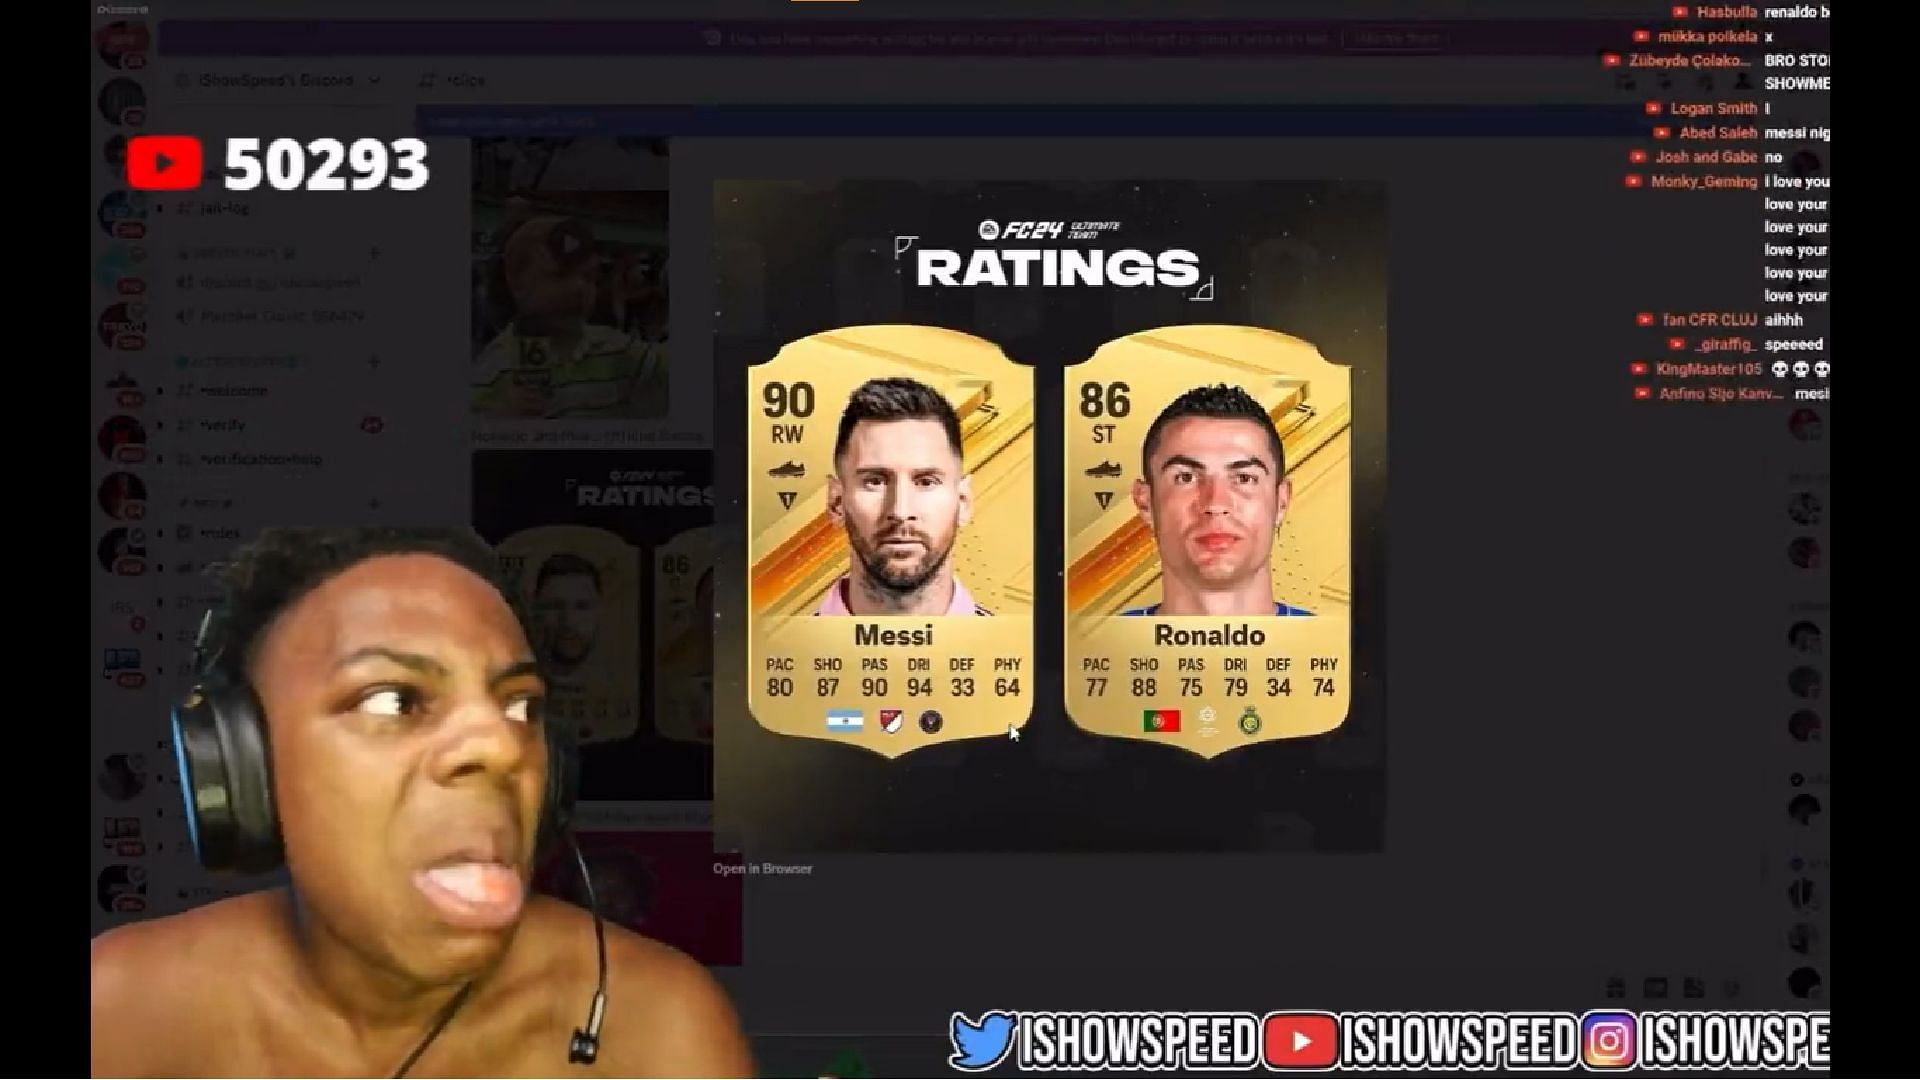 IShowSpeed &quot;threw up&quot; with disgust about Cristiano Ronaldo